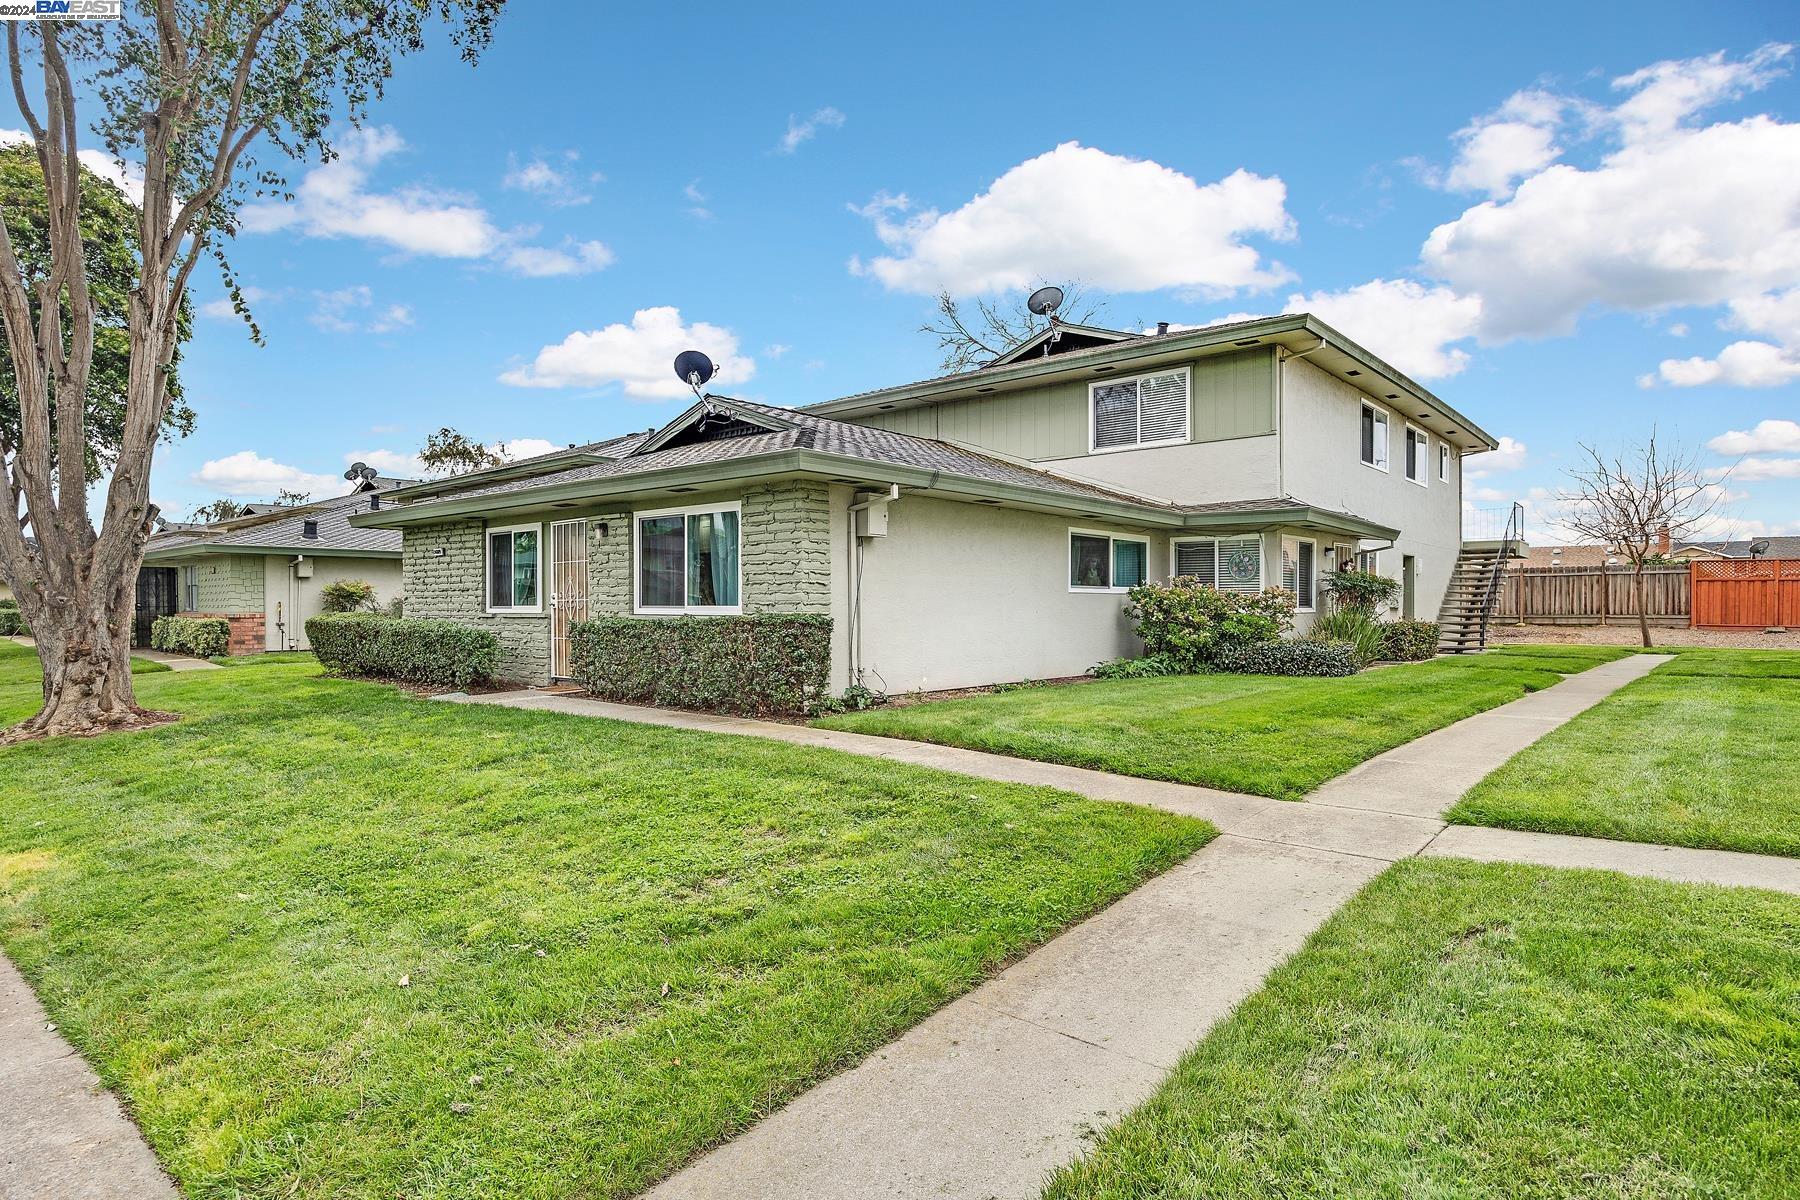 34809 Starling Dr 4, Union City, CA 